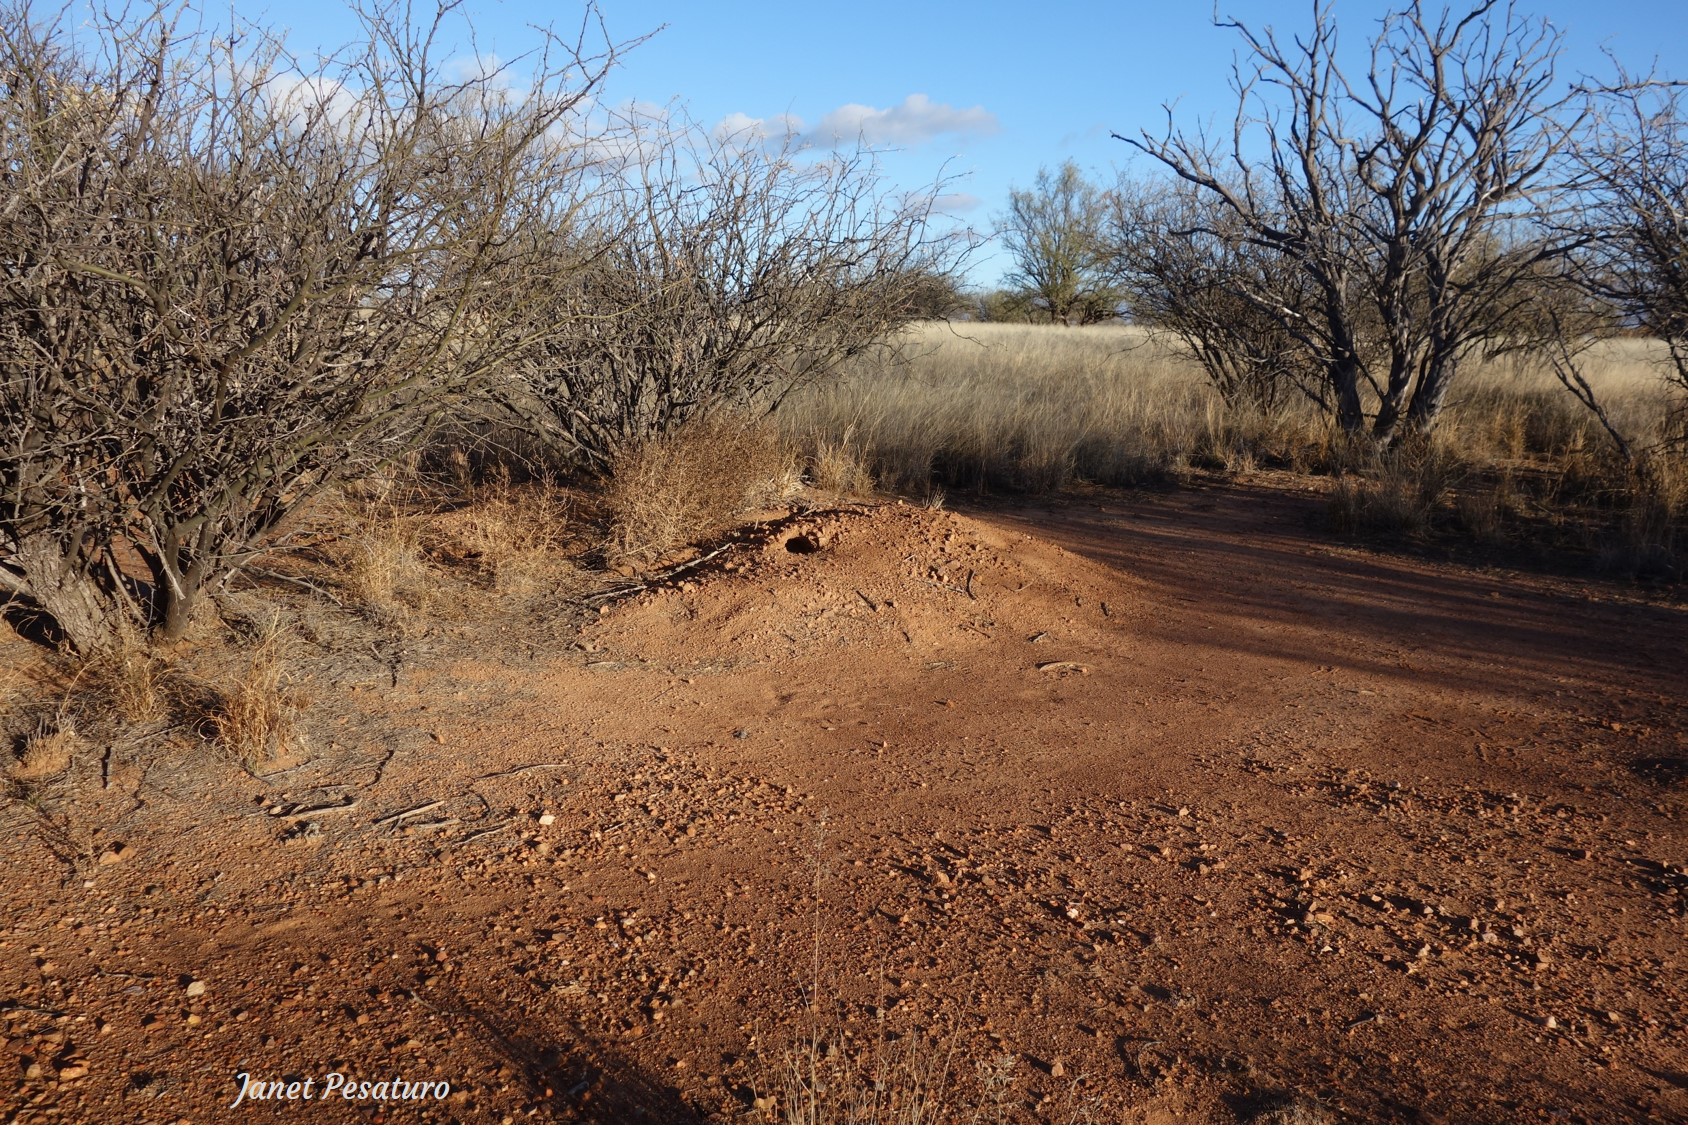 banner-tailed kangaroo rat burrow showing area cleared of vegetation